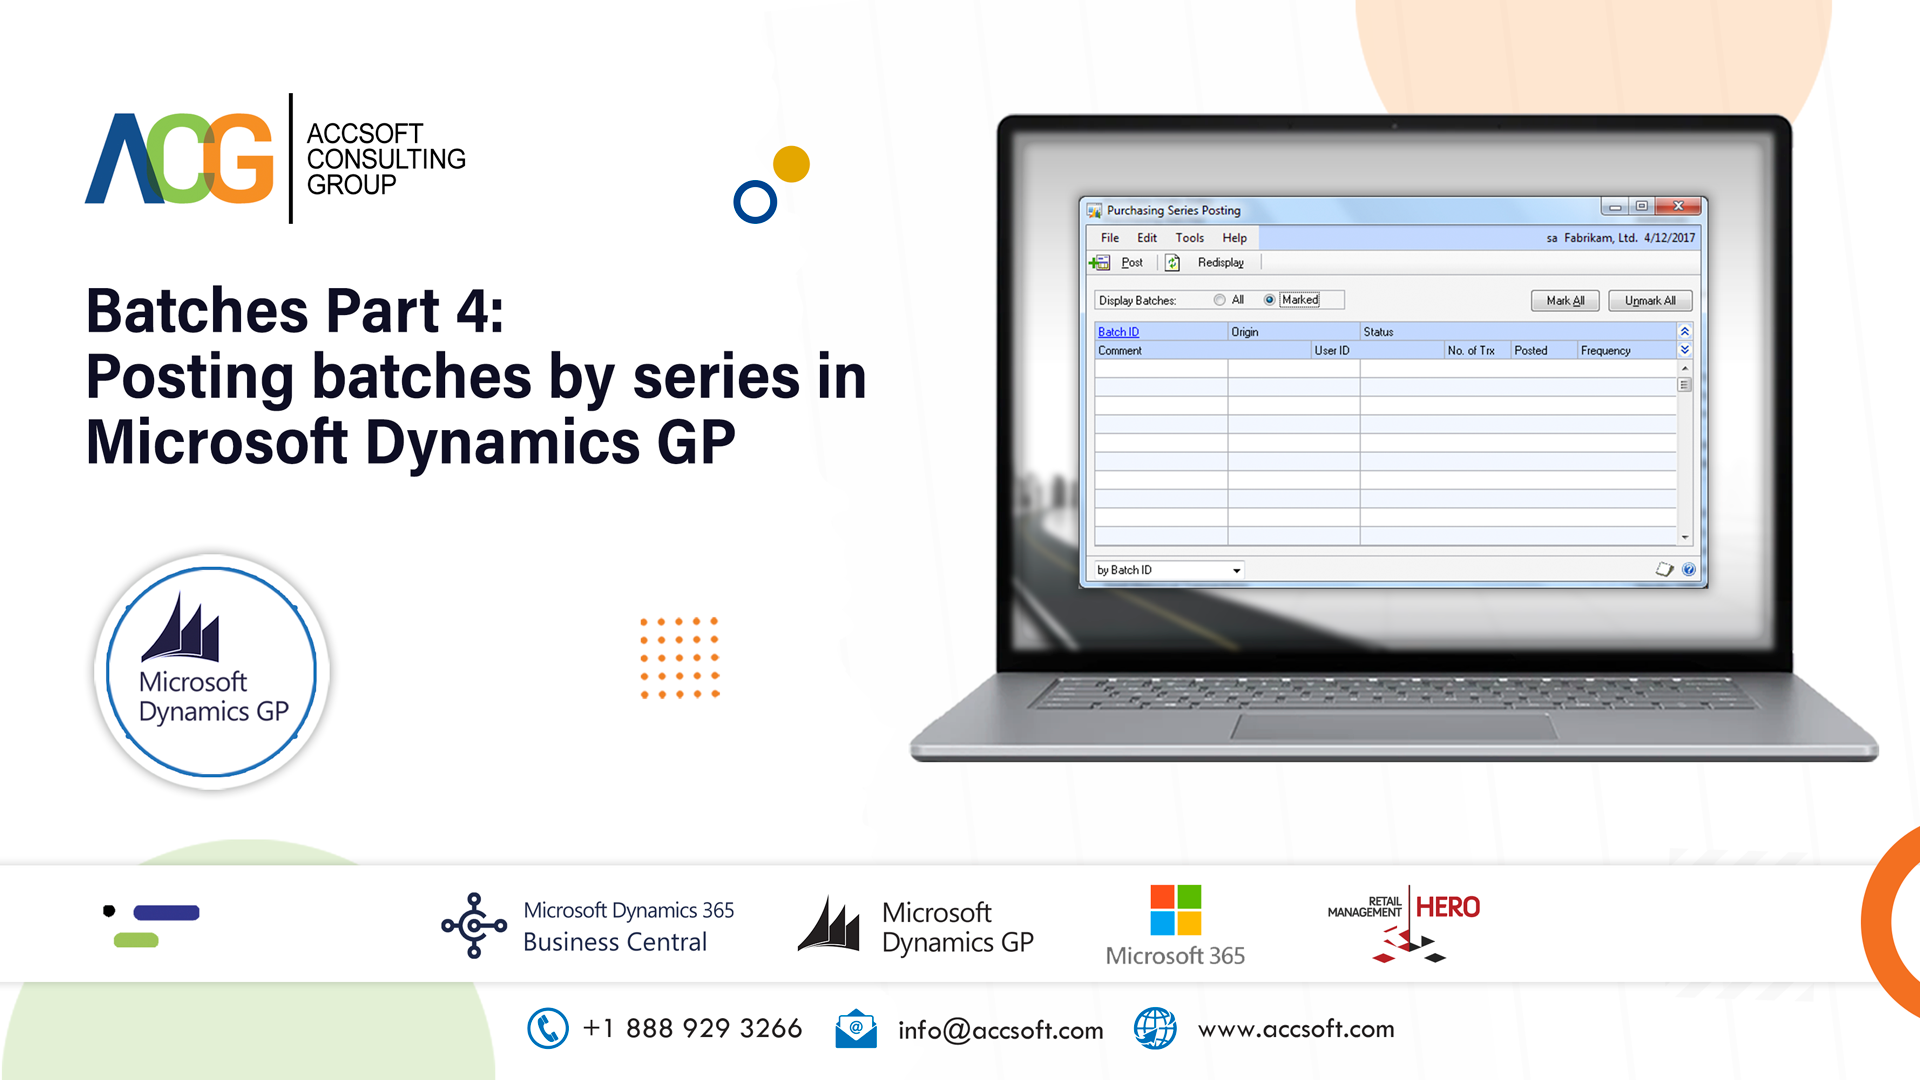 Batches Part 4 Posting batches by series in Microsoft Dynamics GP